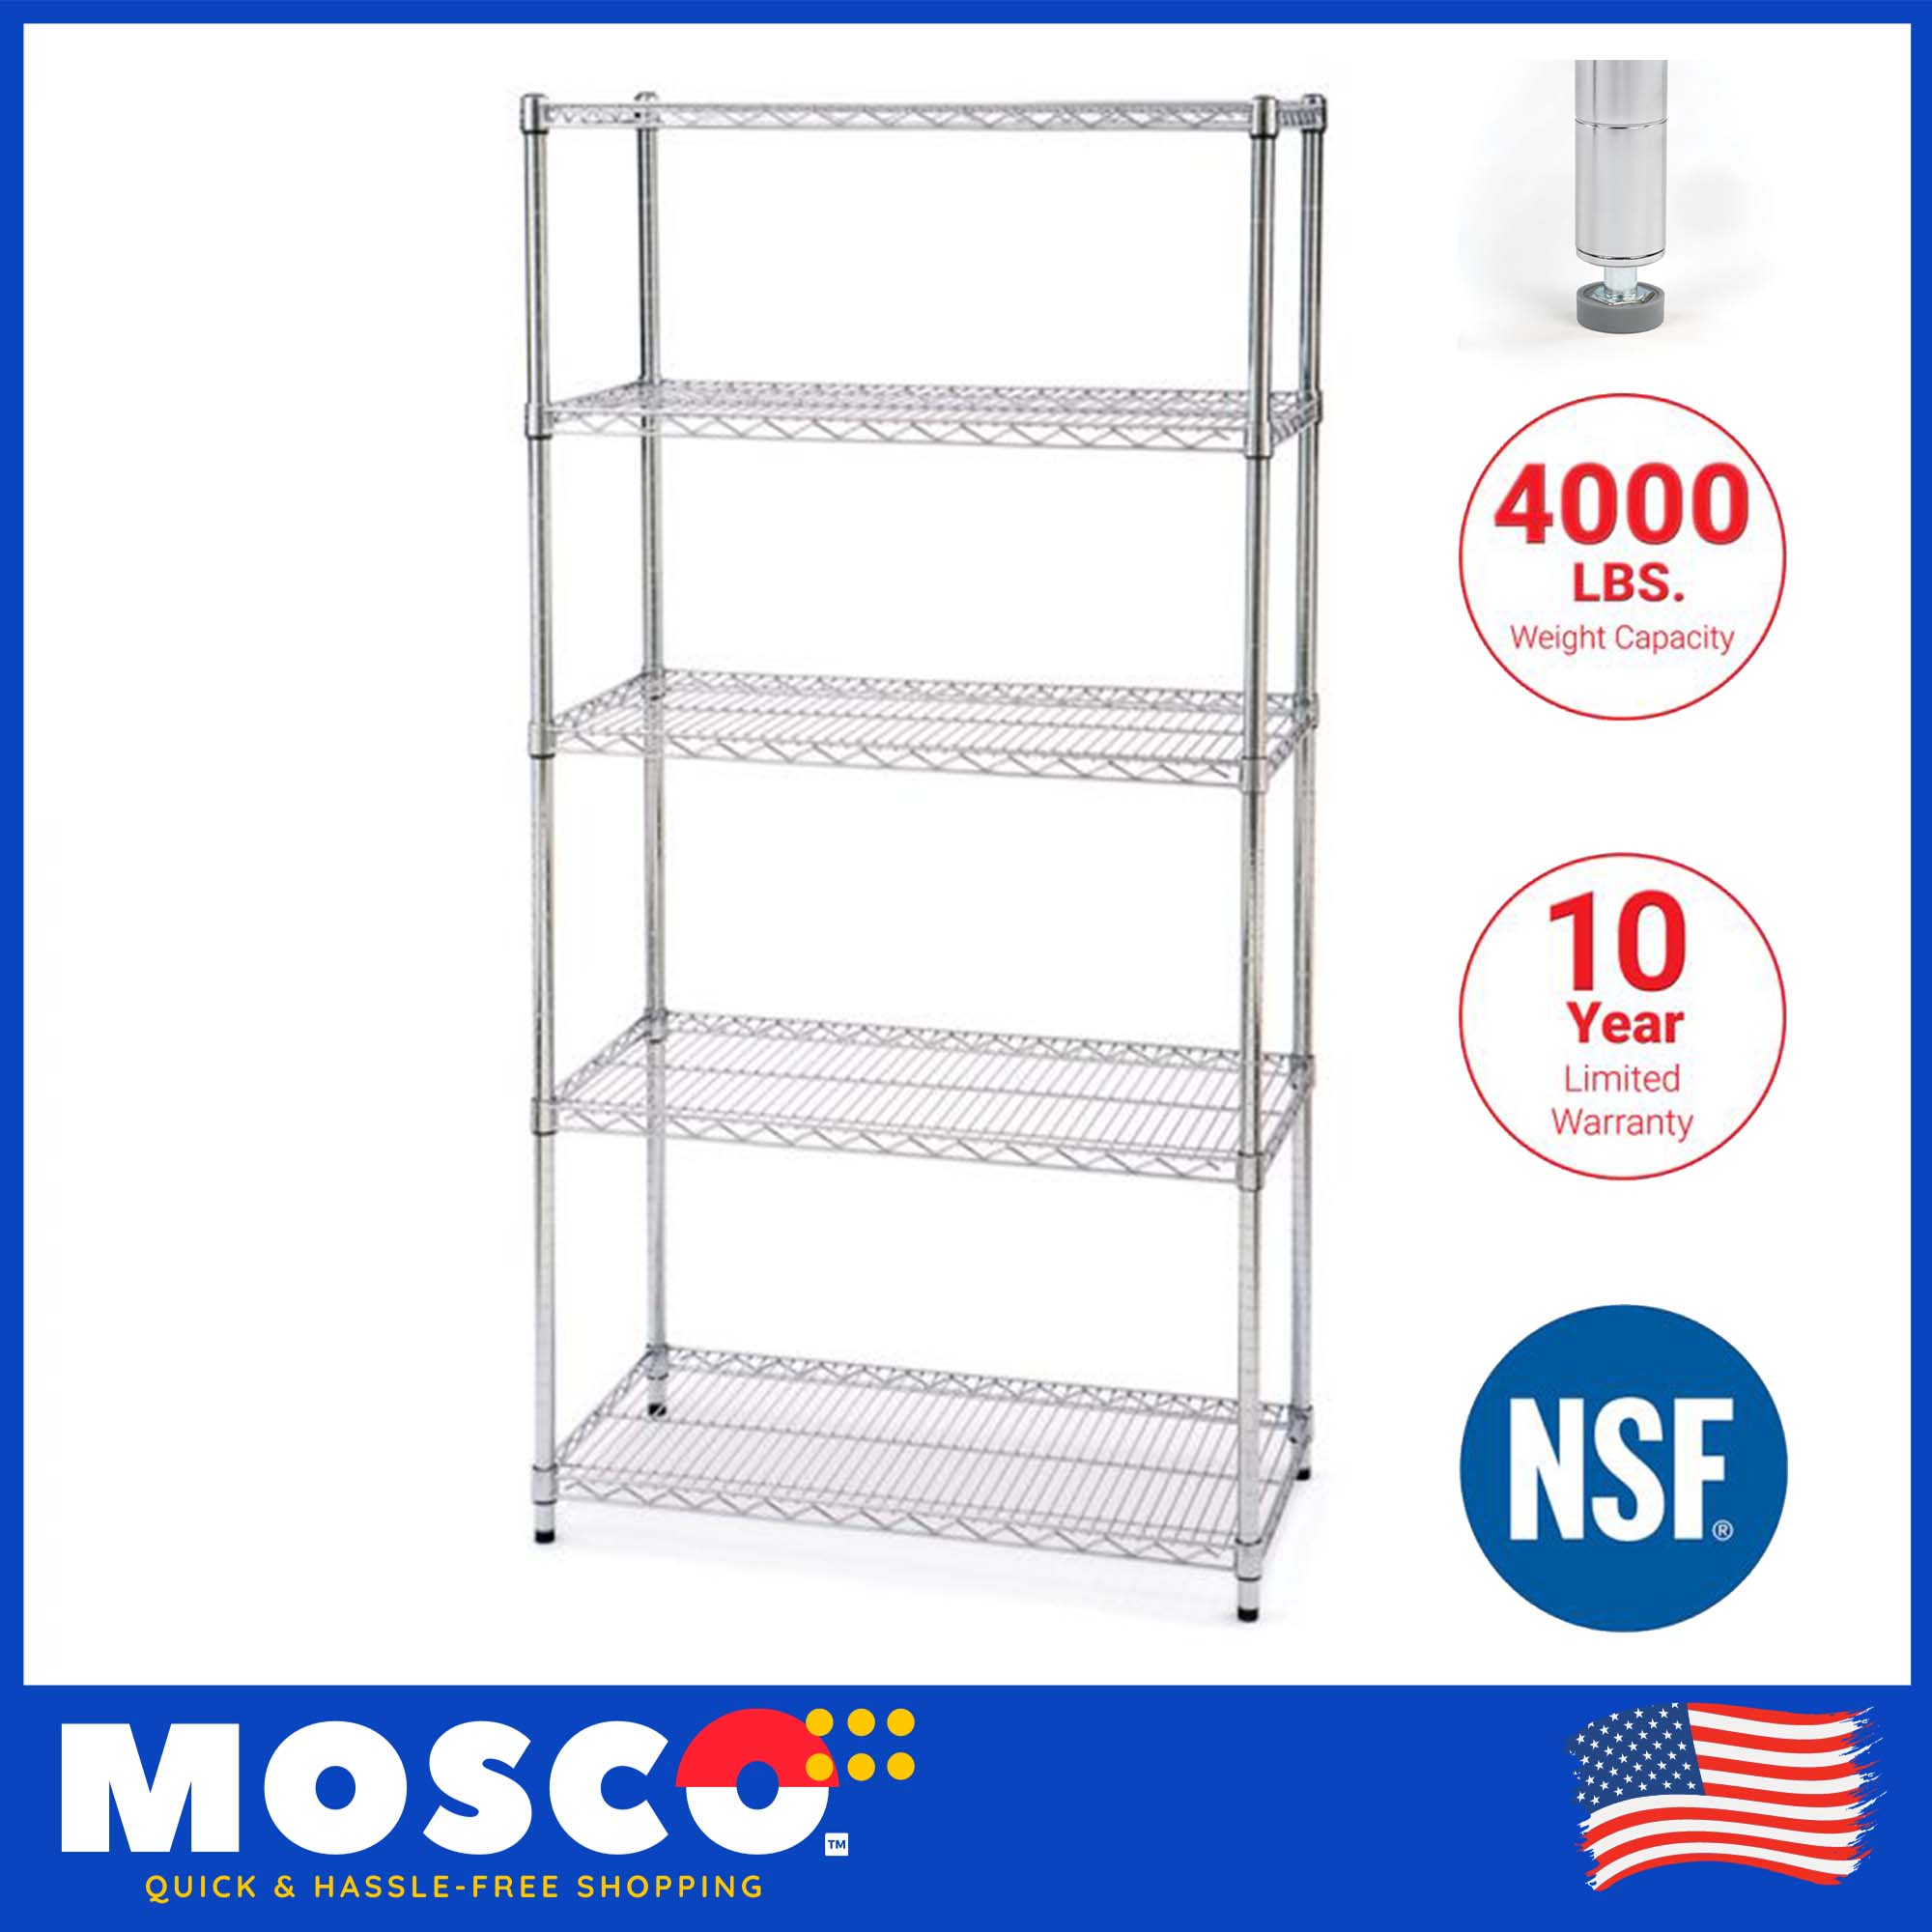 Nsf Certified Steel Wire Shelving, Seville Classics Chrome Wire Shelving